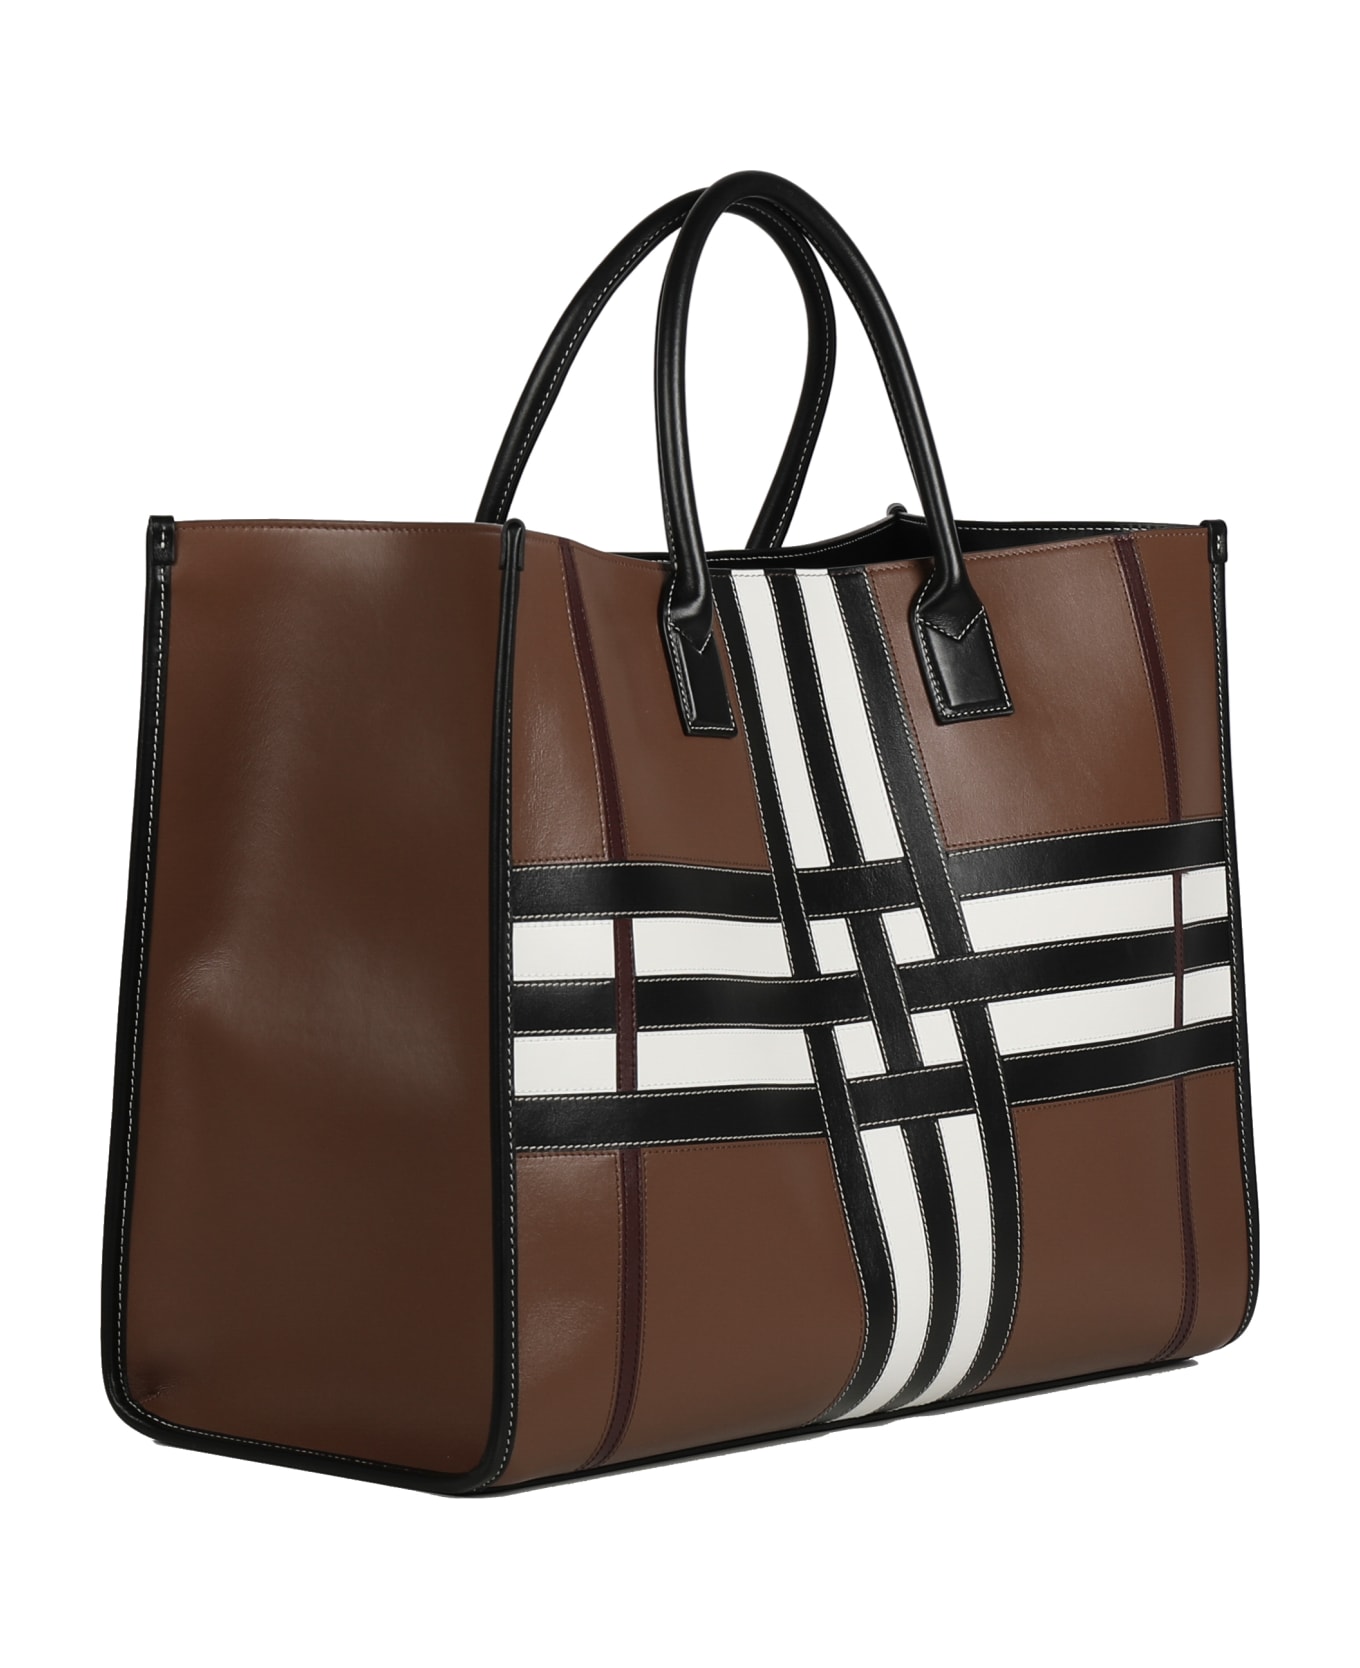 Burberry Leather And Fabric Tote With Tartan Pattern - Brown